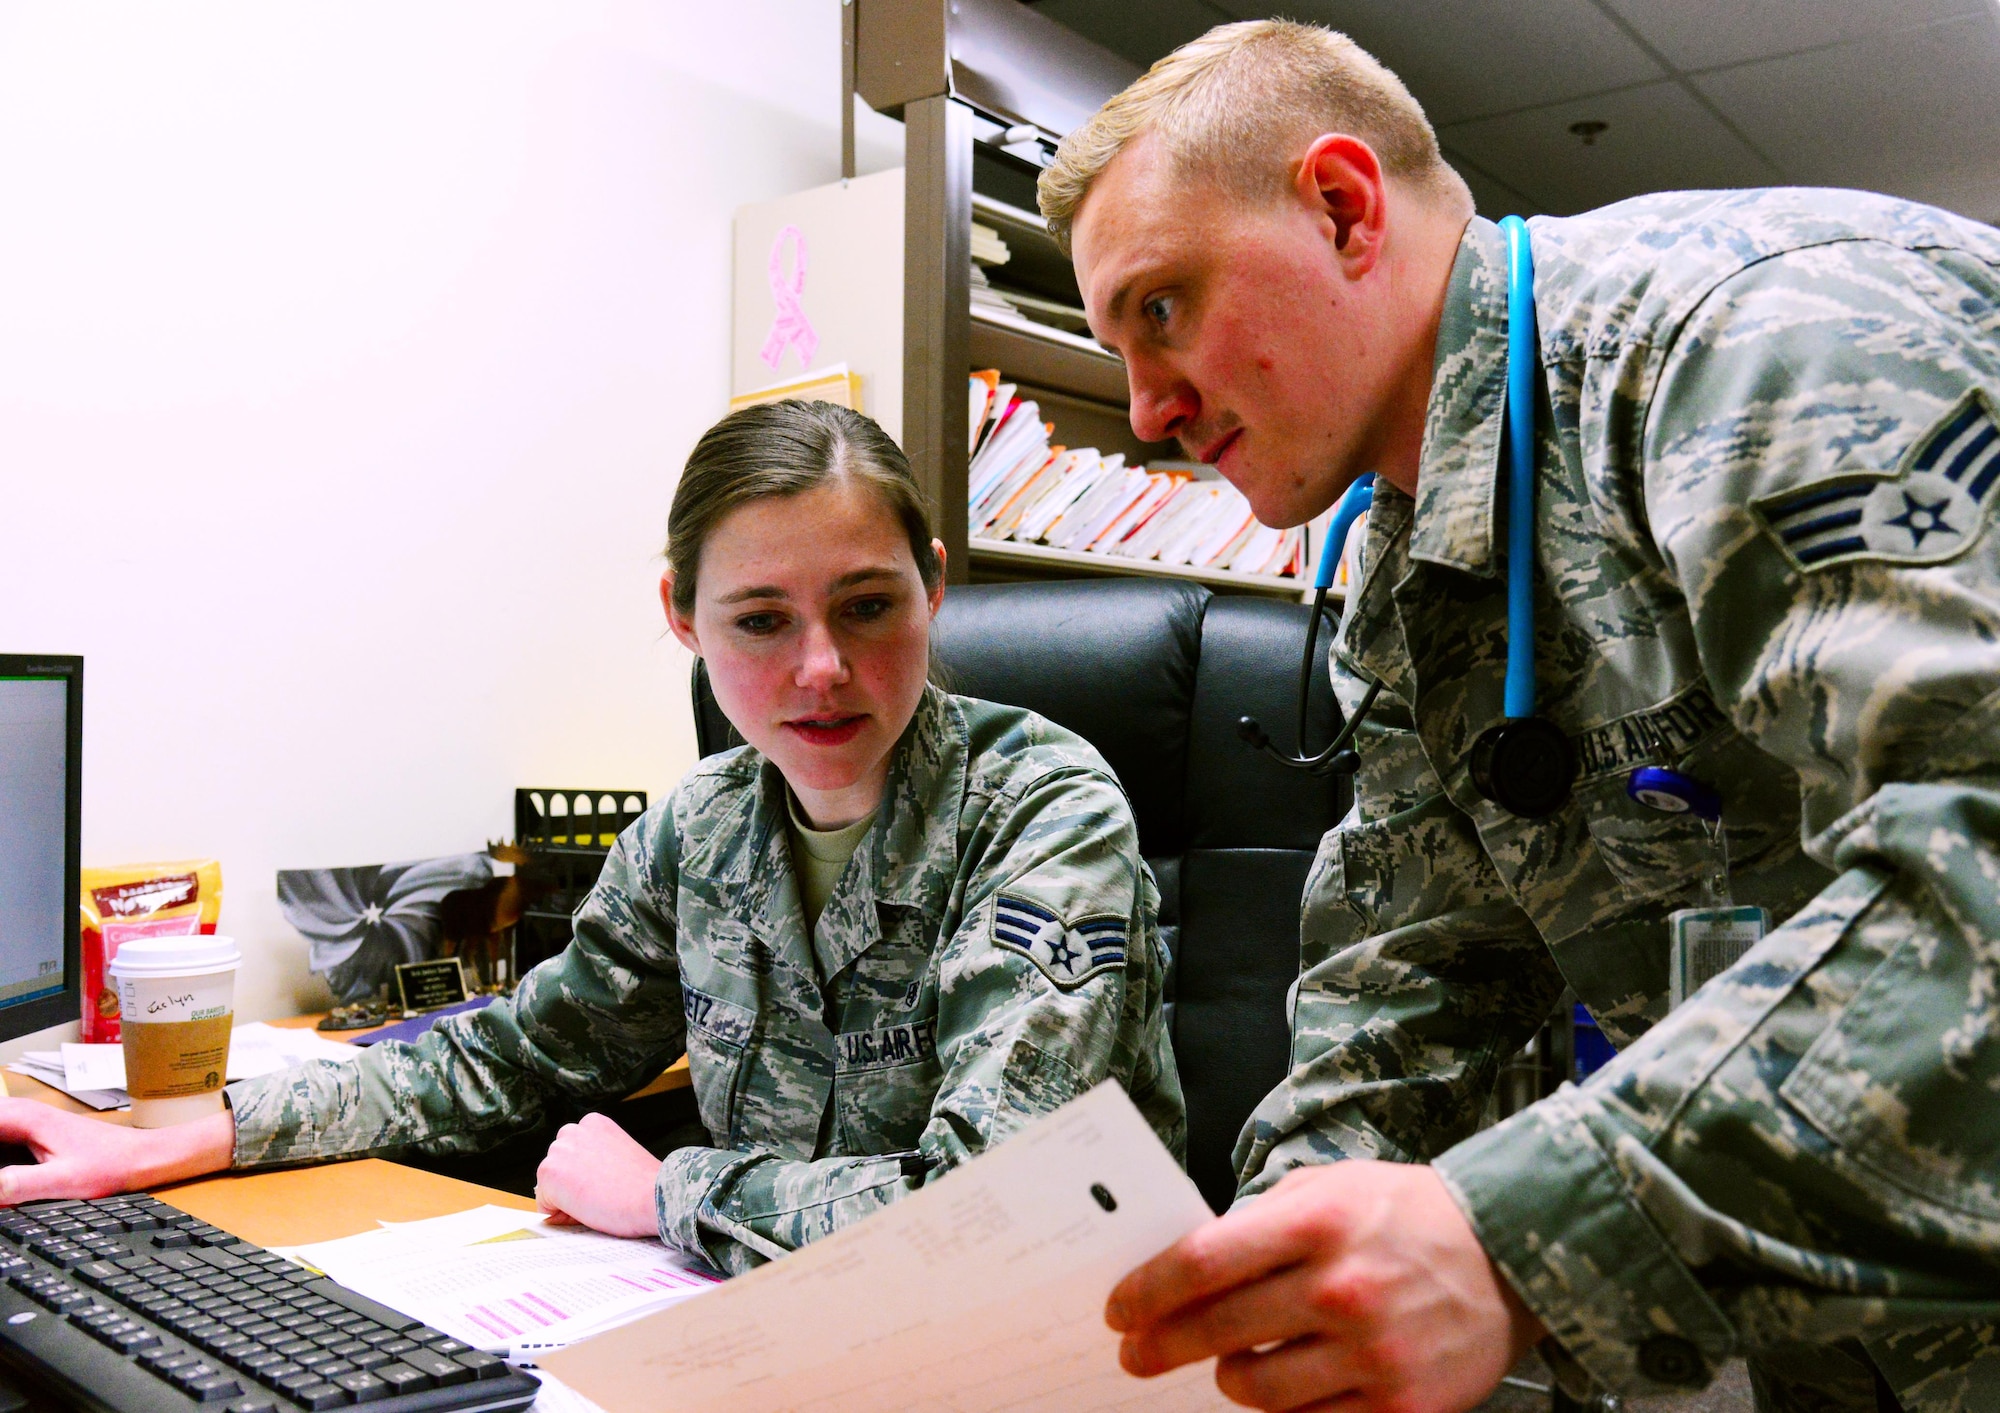 Senior Airmen Jeslyn Raetz, left, and Nathaniel Morris, right, both 341st Medical Operation Squadron technicians, check quality assurance on patients’ medical paperwork Jan. 30, 2017, at Malmstrom Air Force Base, Mont. Medical files for all patients seen each day must be filled out properly because they are an inspectable item. (U.S. Air Force photo/Airman 1st Class Magen M. Reeves)